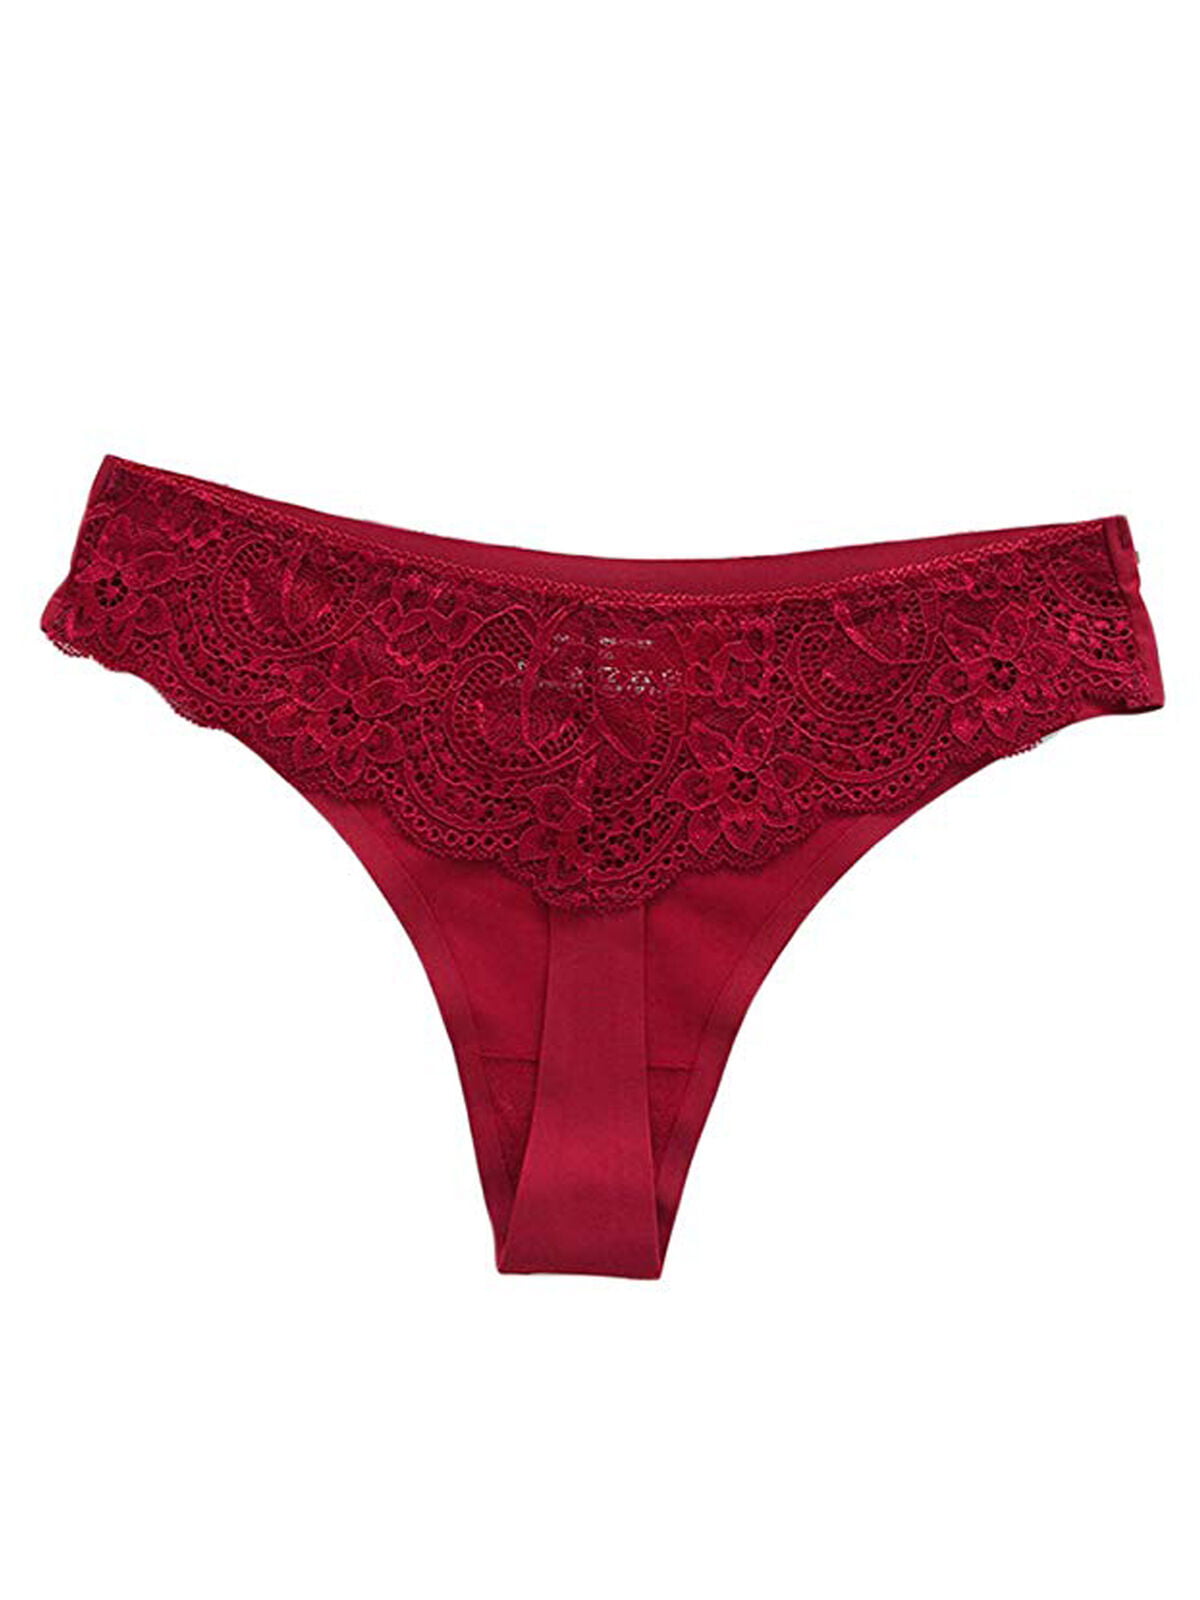 New G-string Panties Lace Thongs V-string Underwear Knickers Lingerie Women 